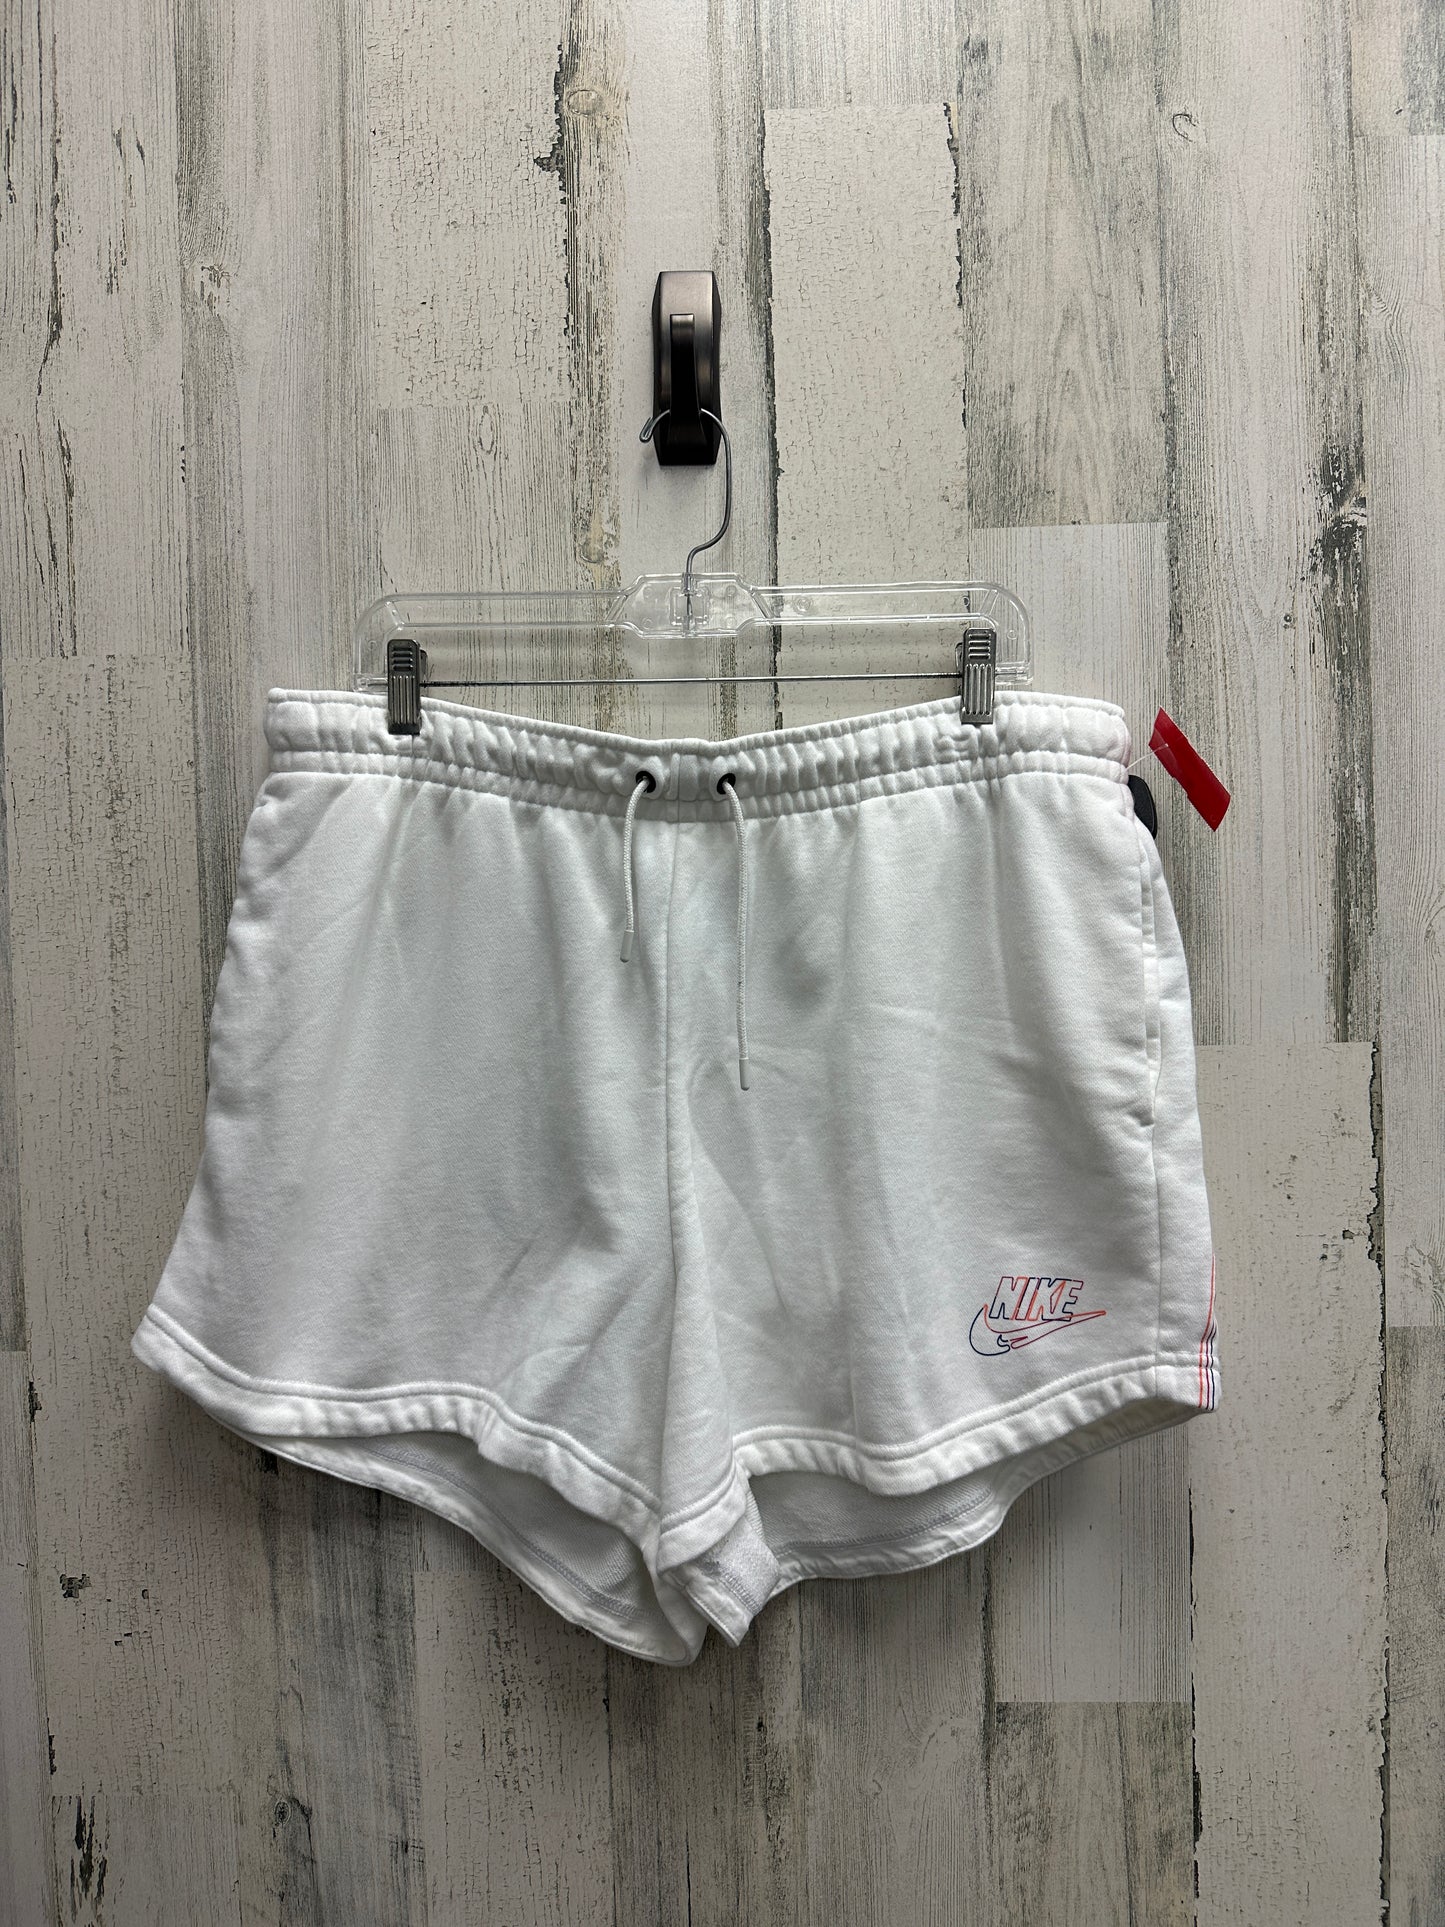 Shorts By Nike Apparel  Size: 1x